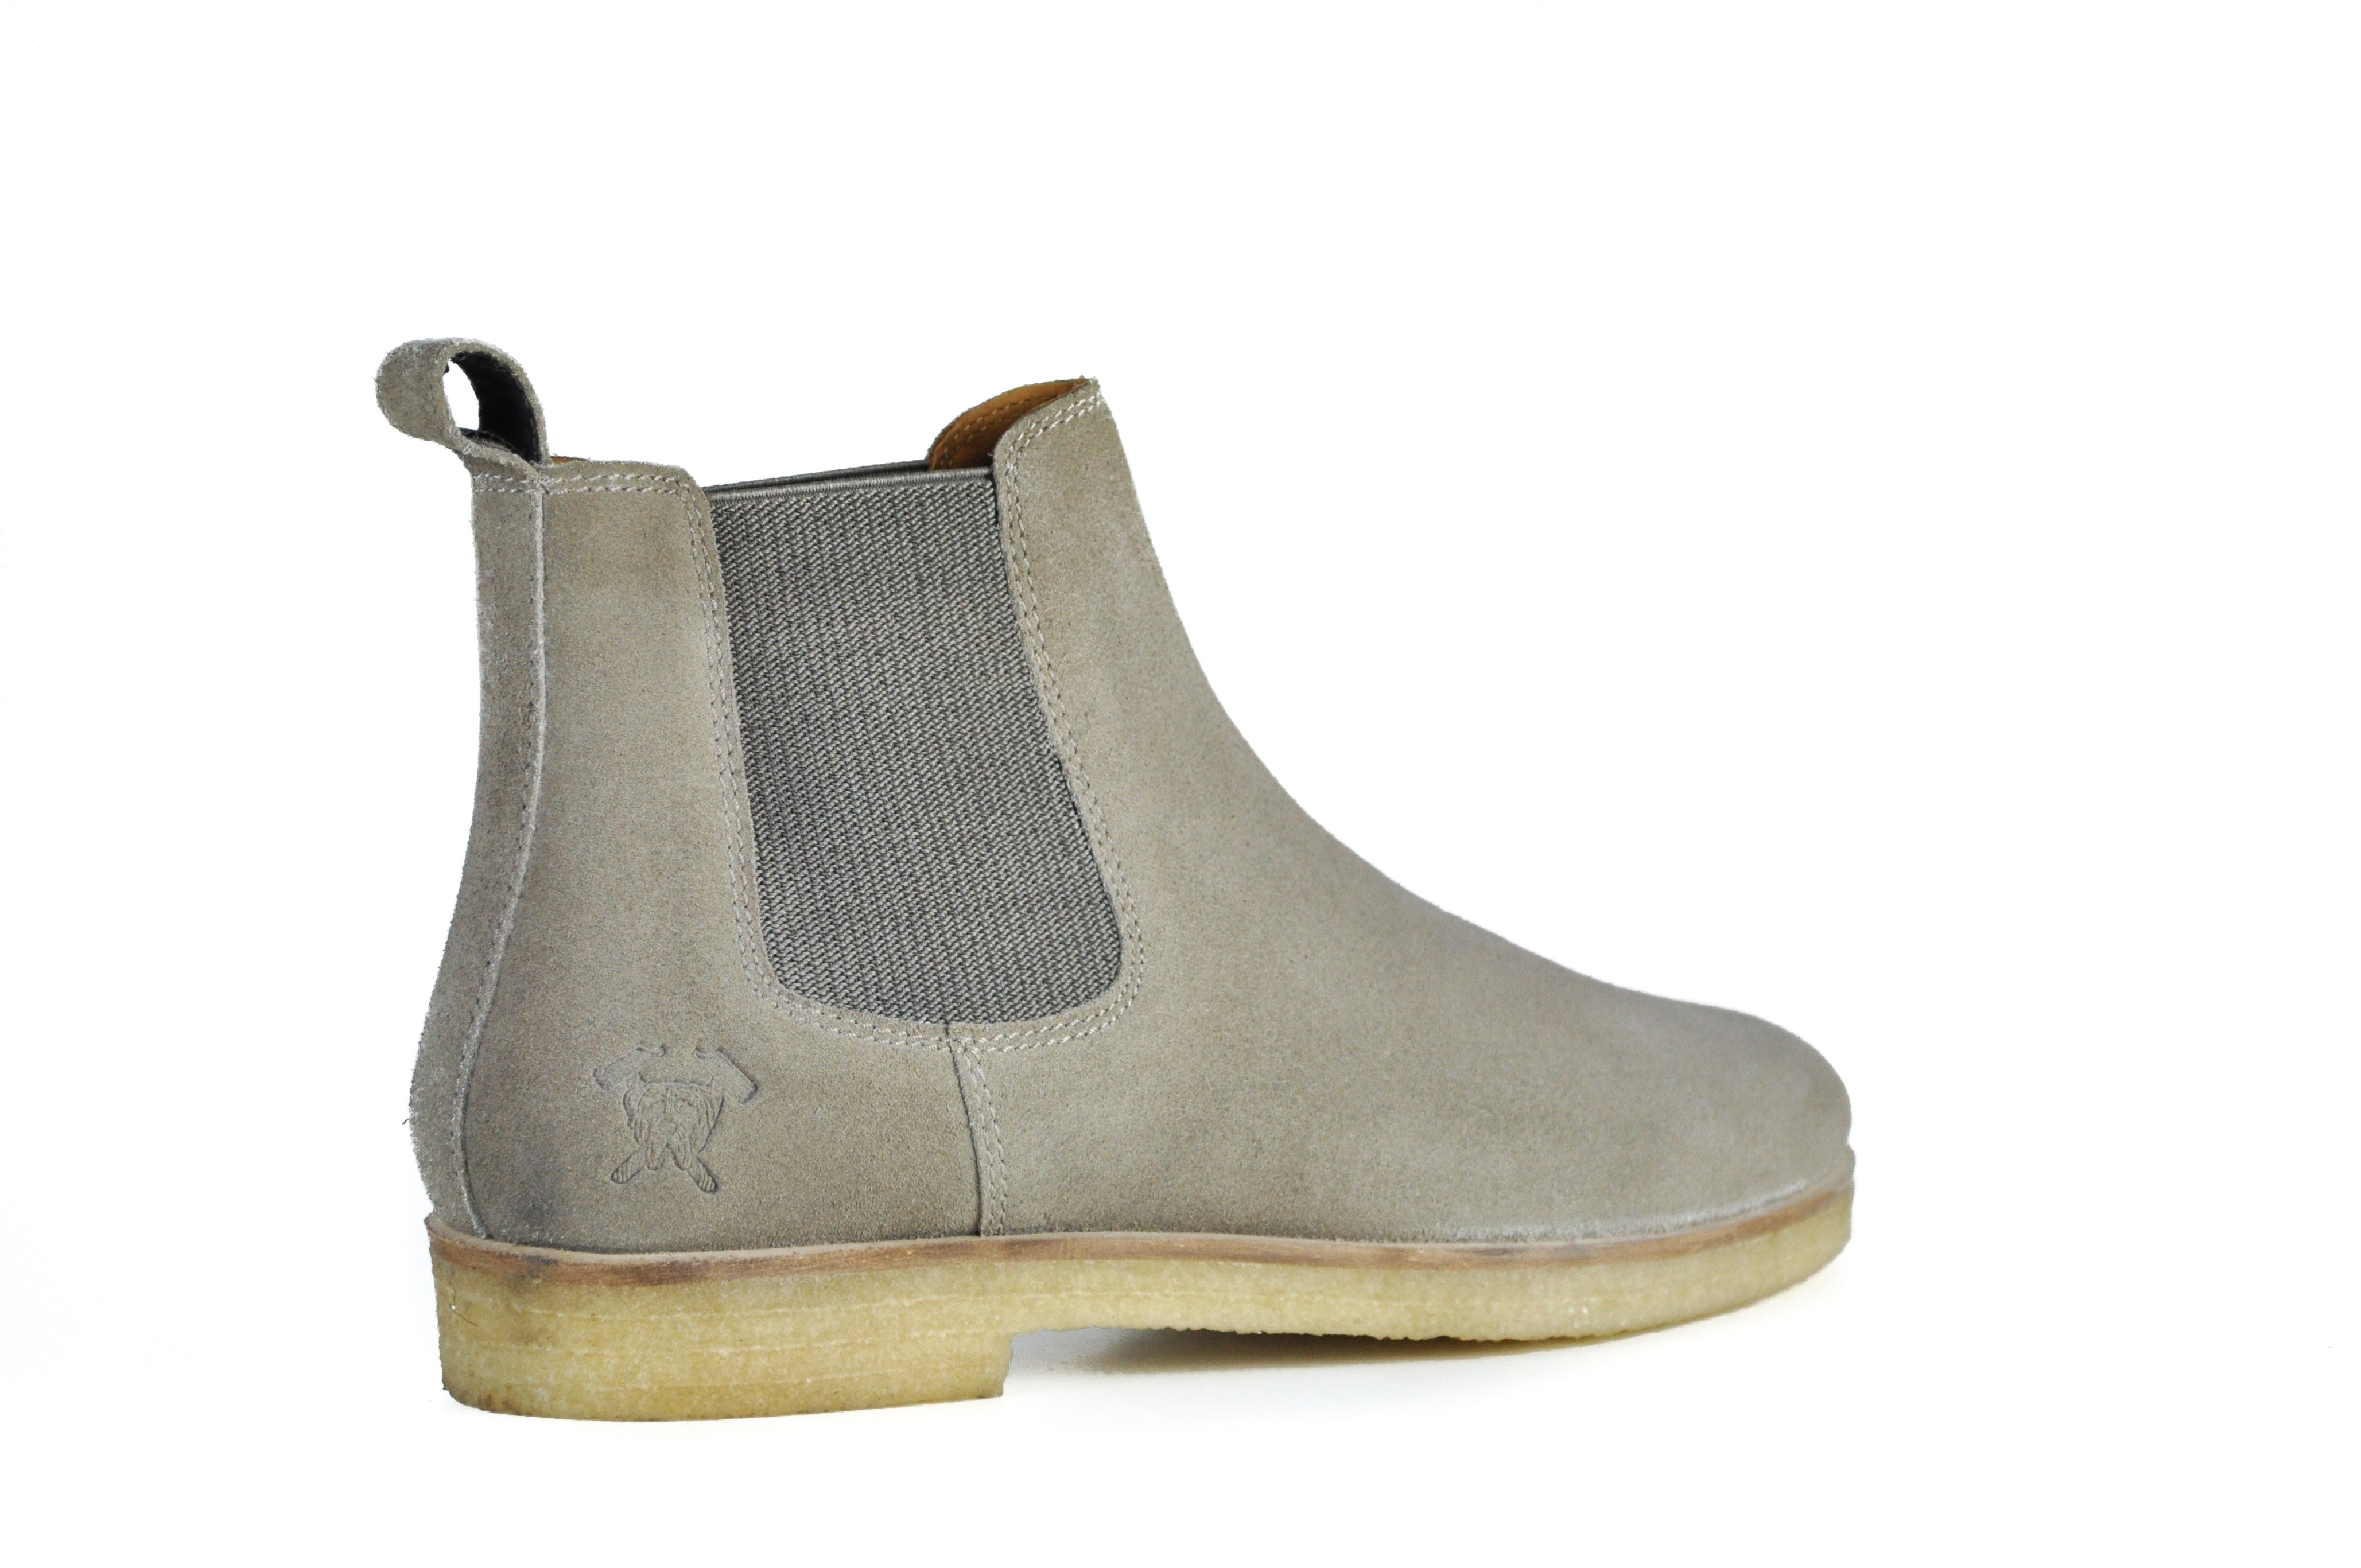 Chelsea Boot - The Maddox Mens Boot Black Suede - Hound and Boots